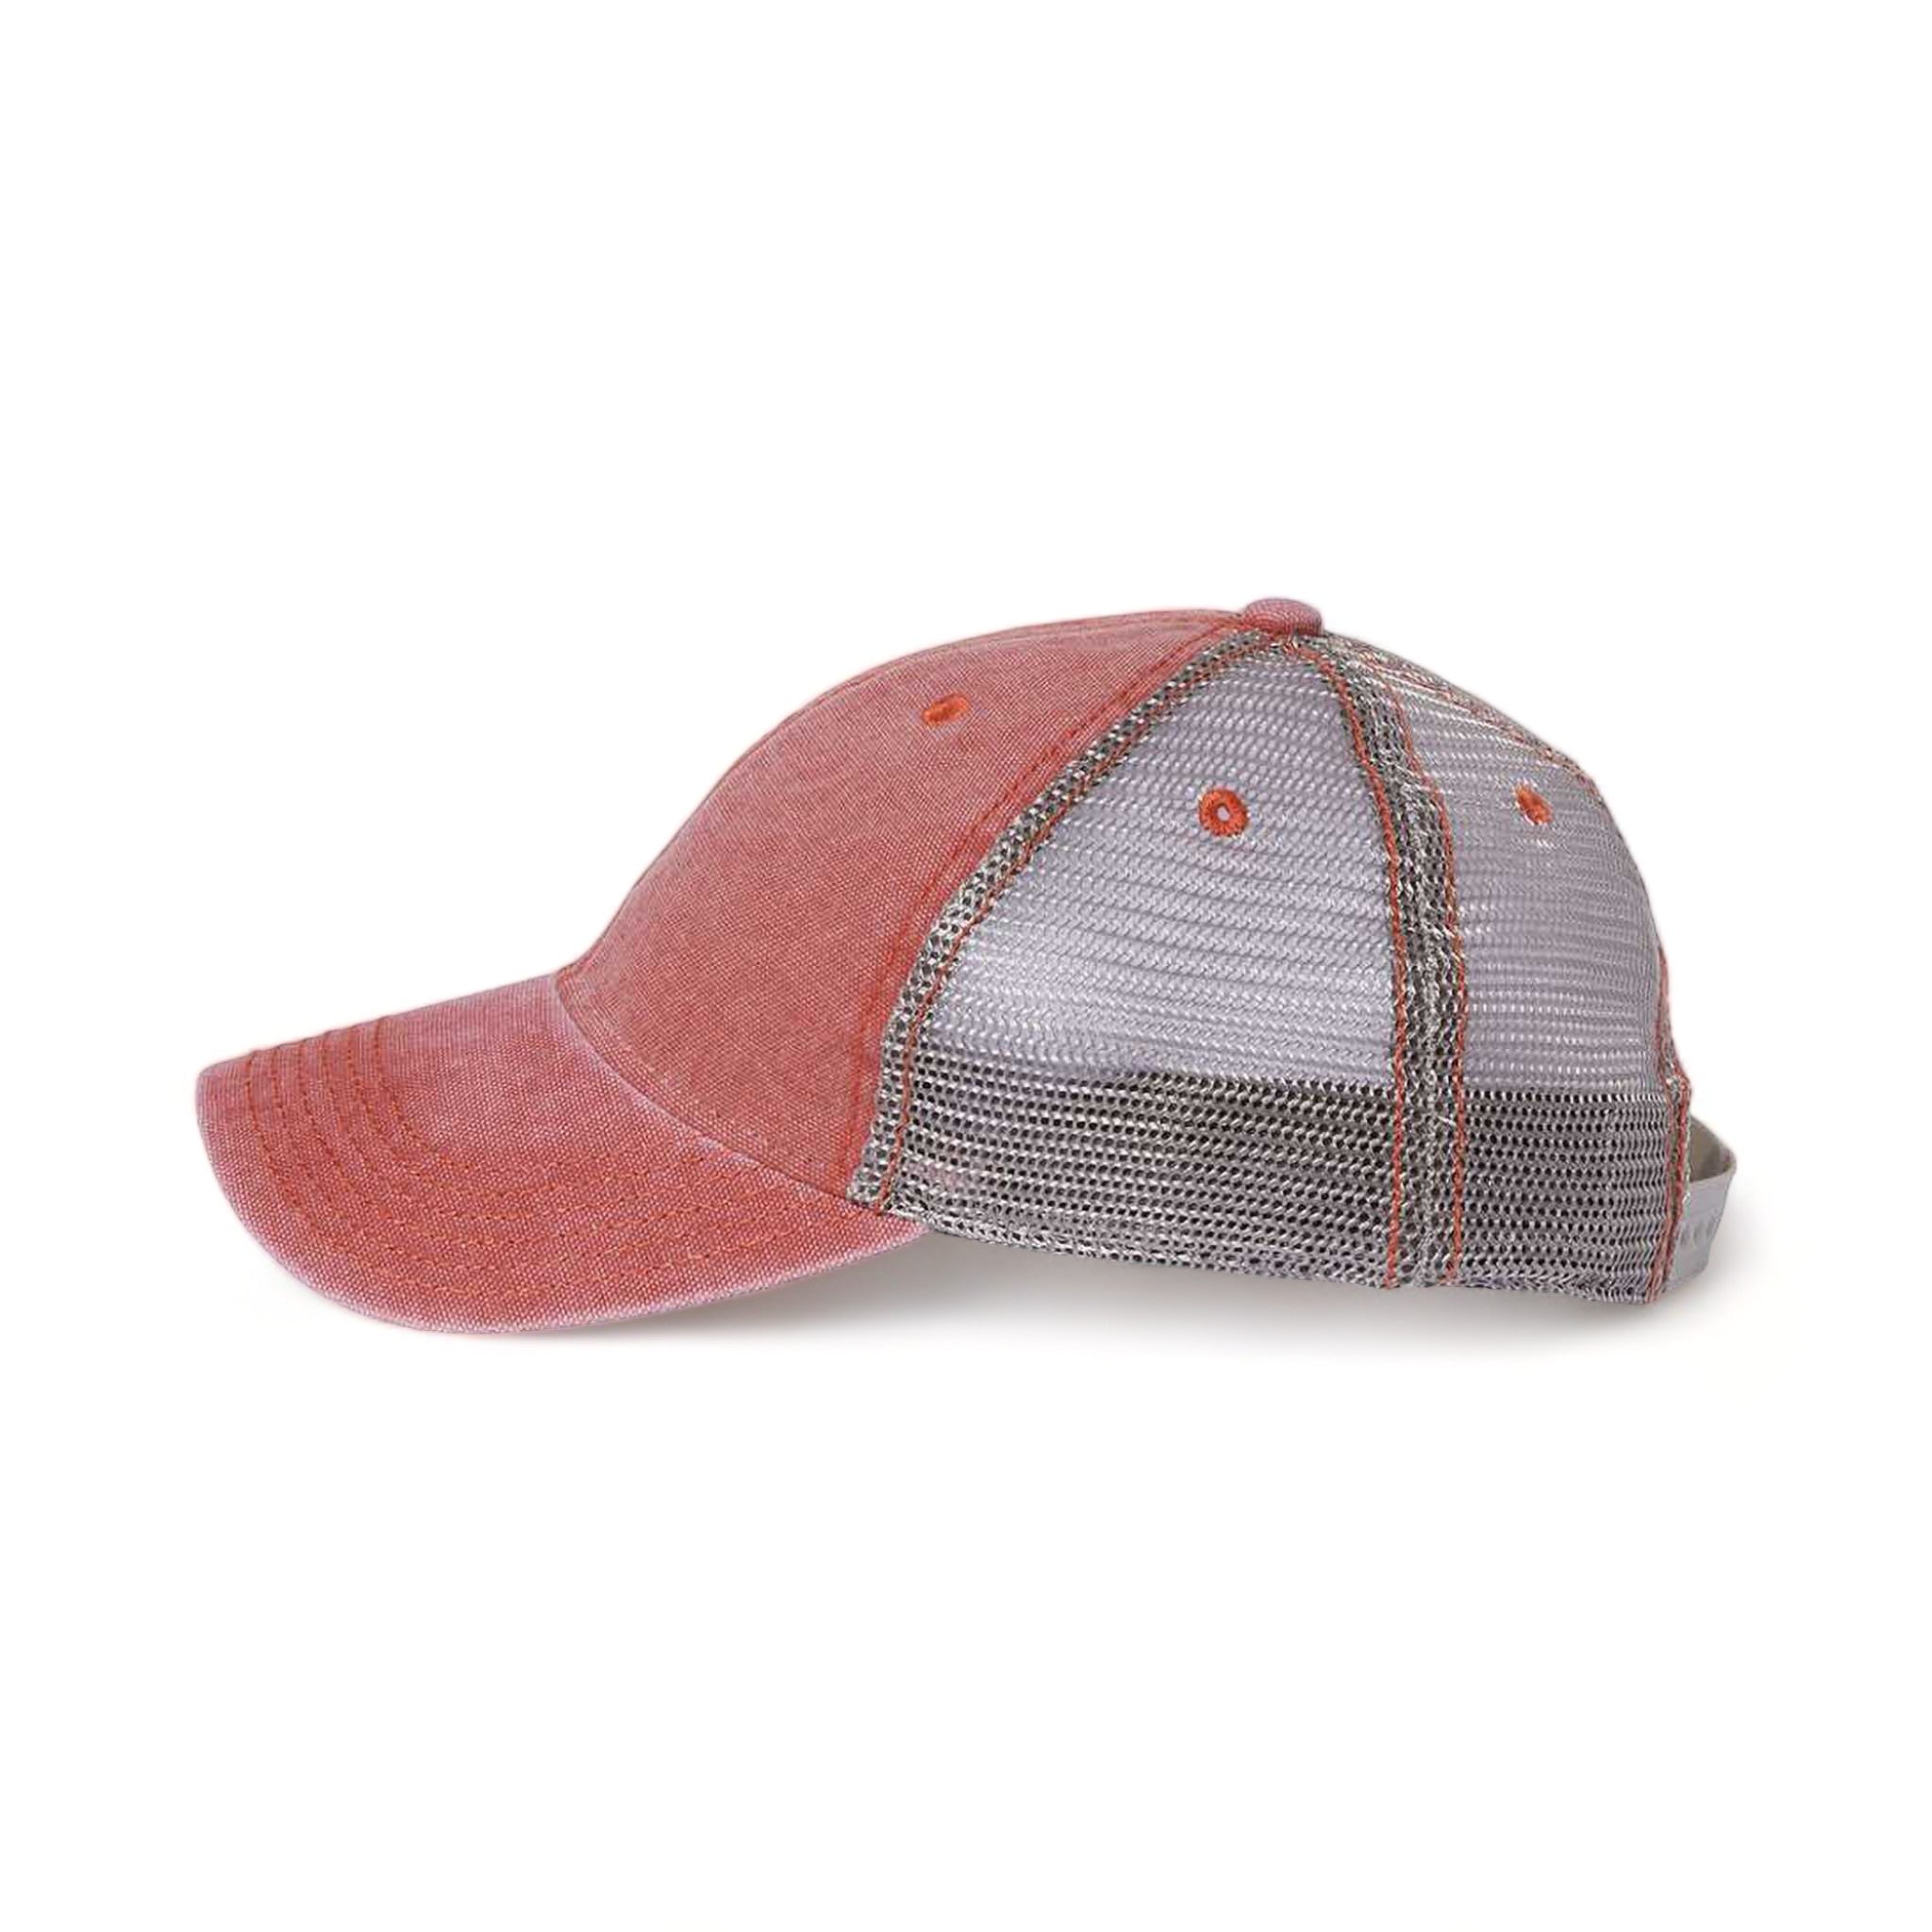 Side view of LEGACY DTA custom hat in nantucket red and grey